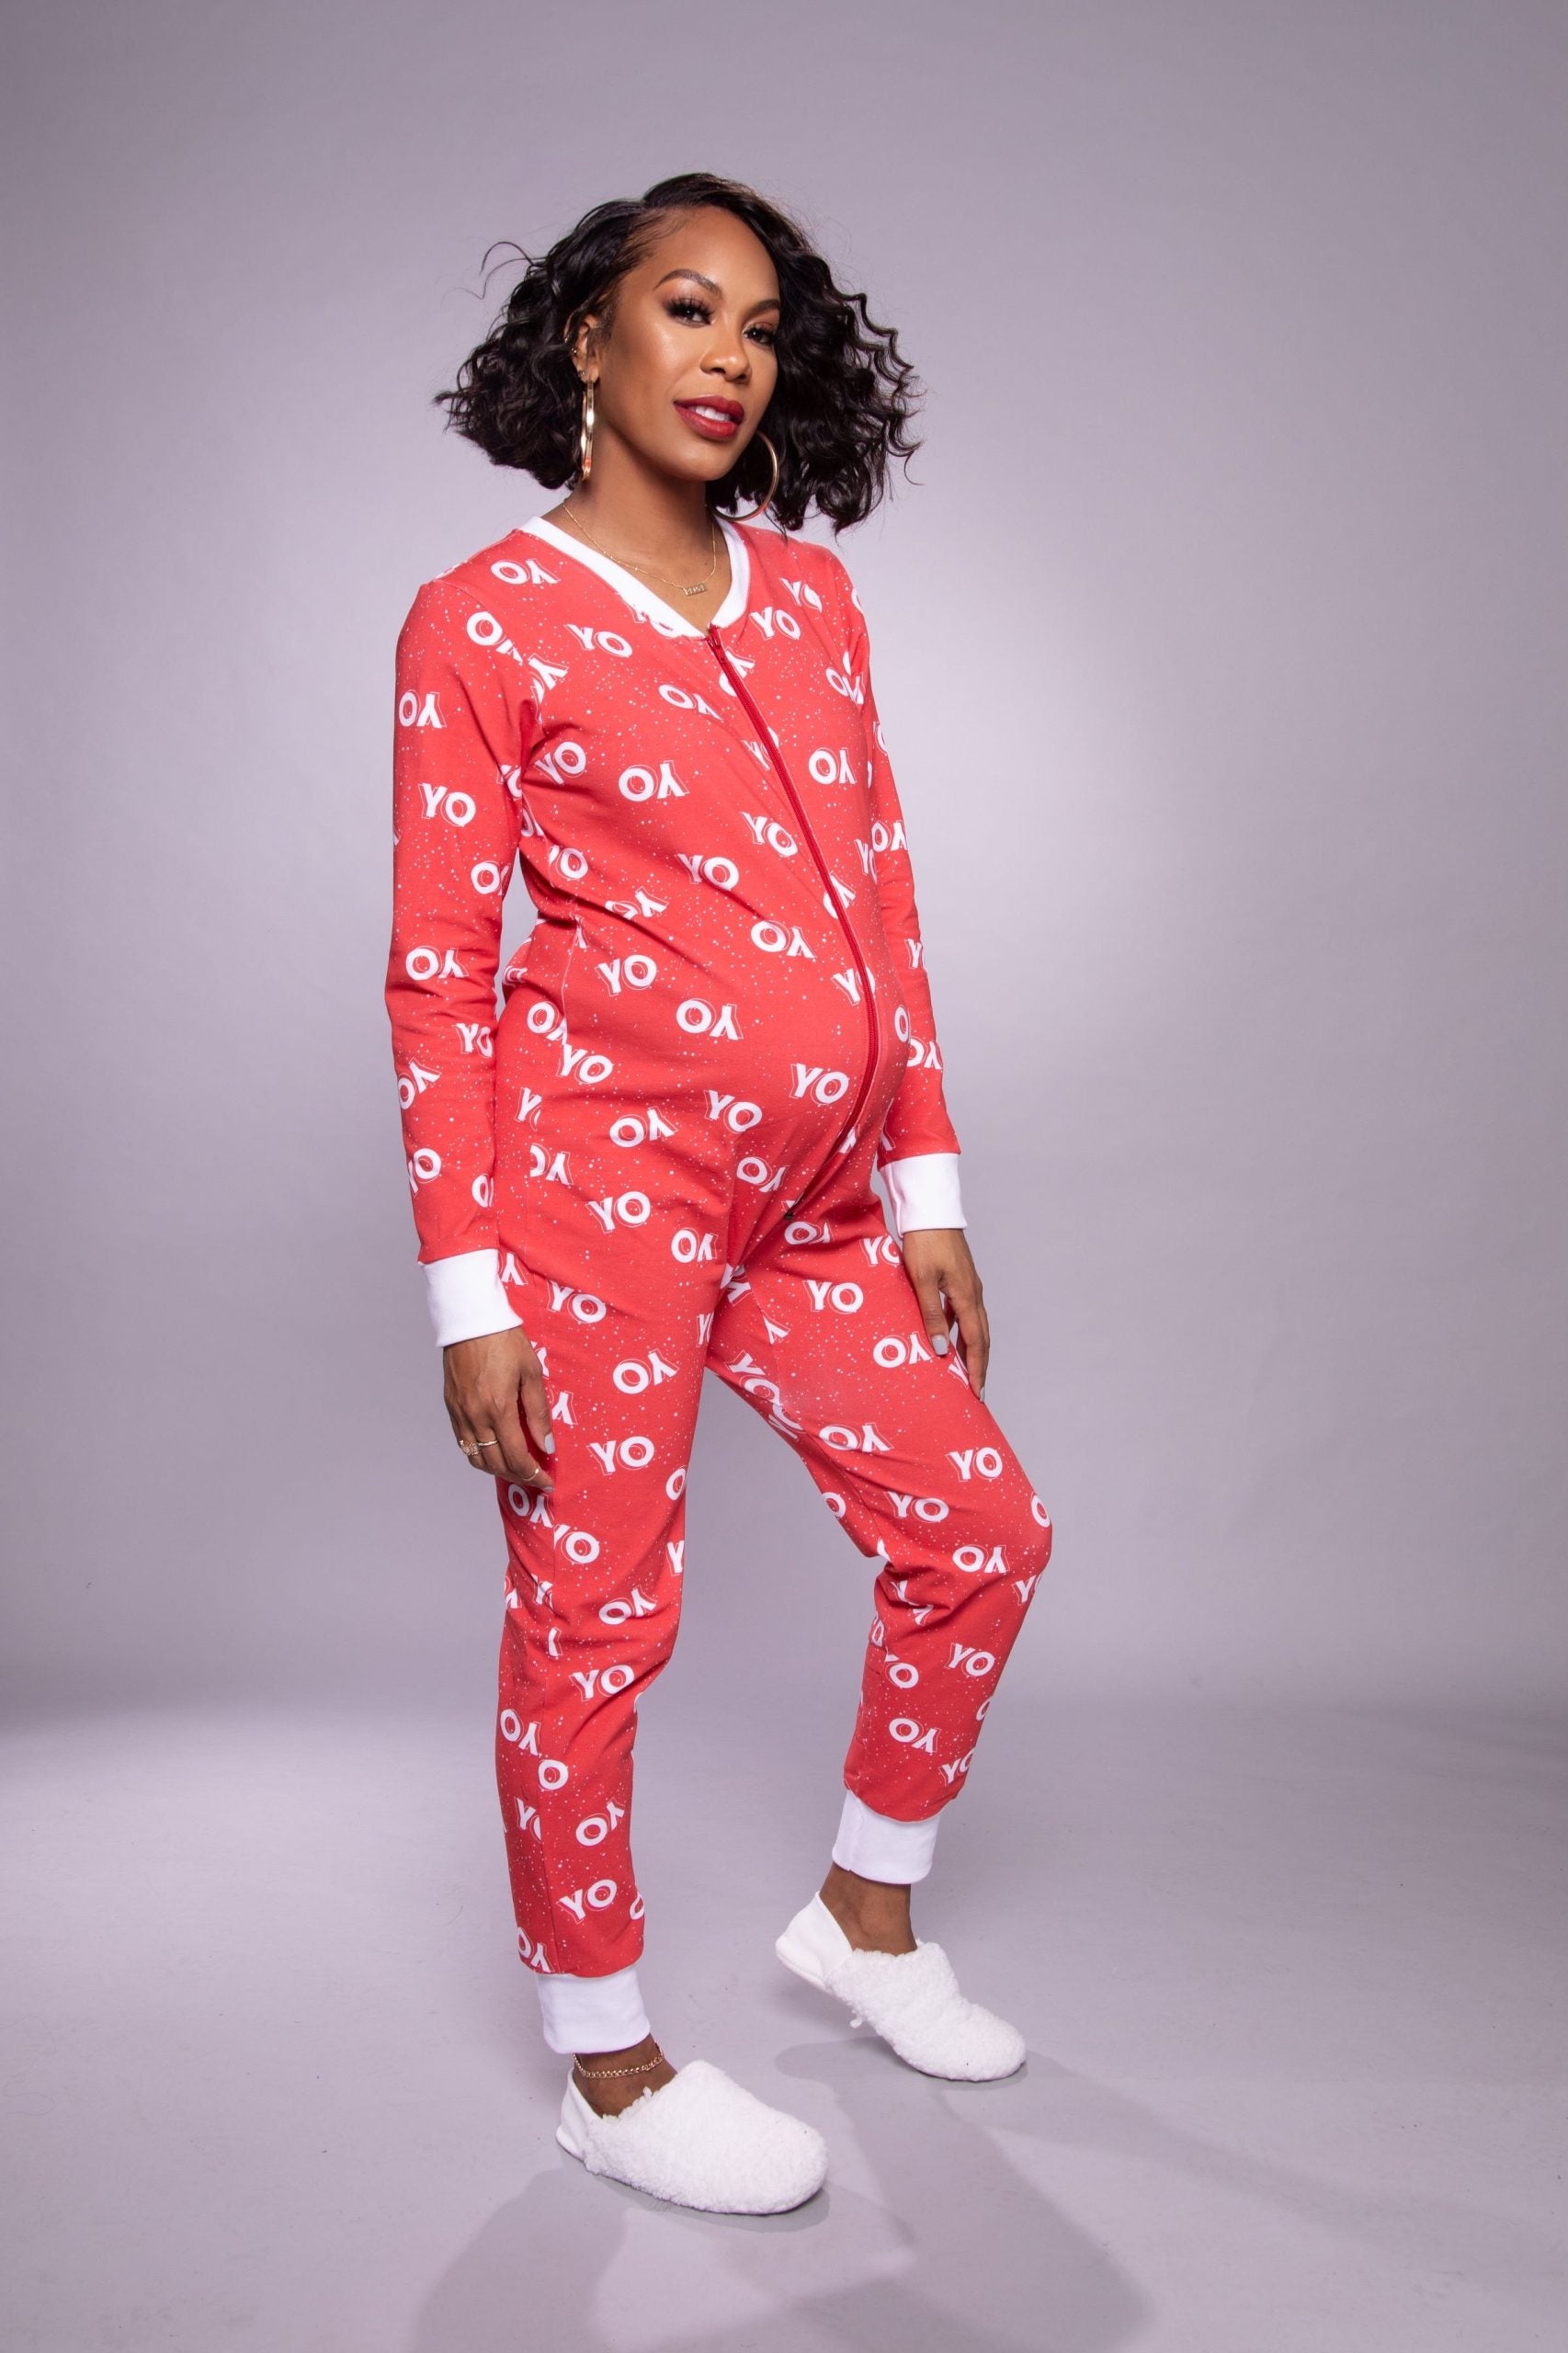 The Real Housewives of Atlanta’s Sanya Richards-Ross On Creating Her First Family-Friendly Pajama Collection